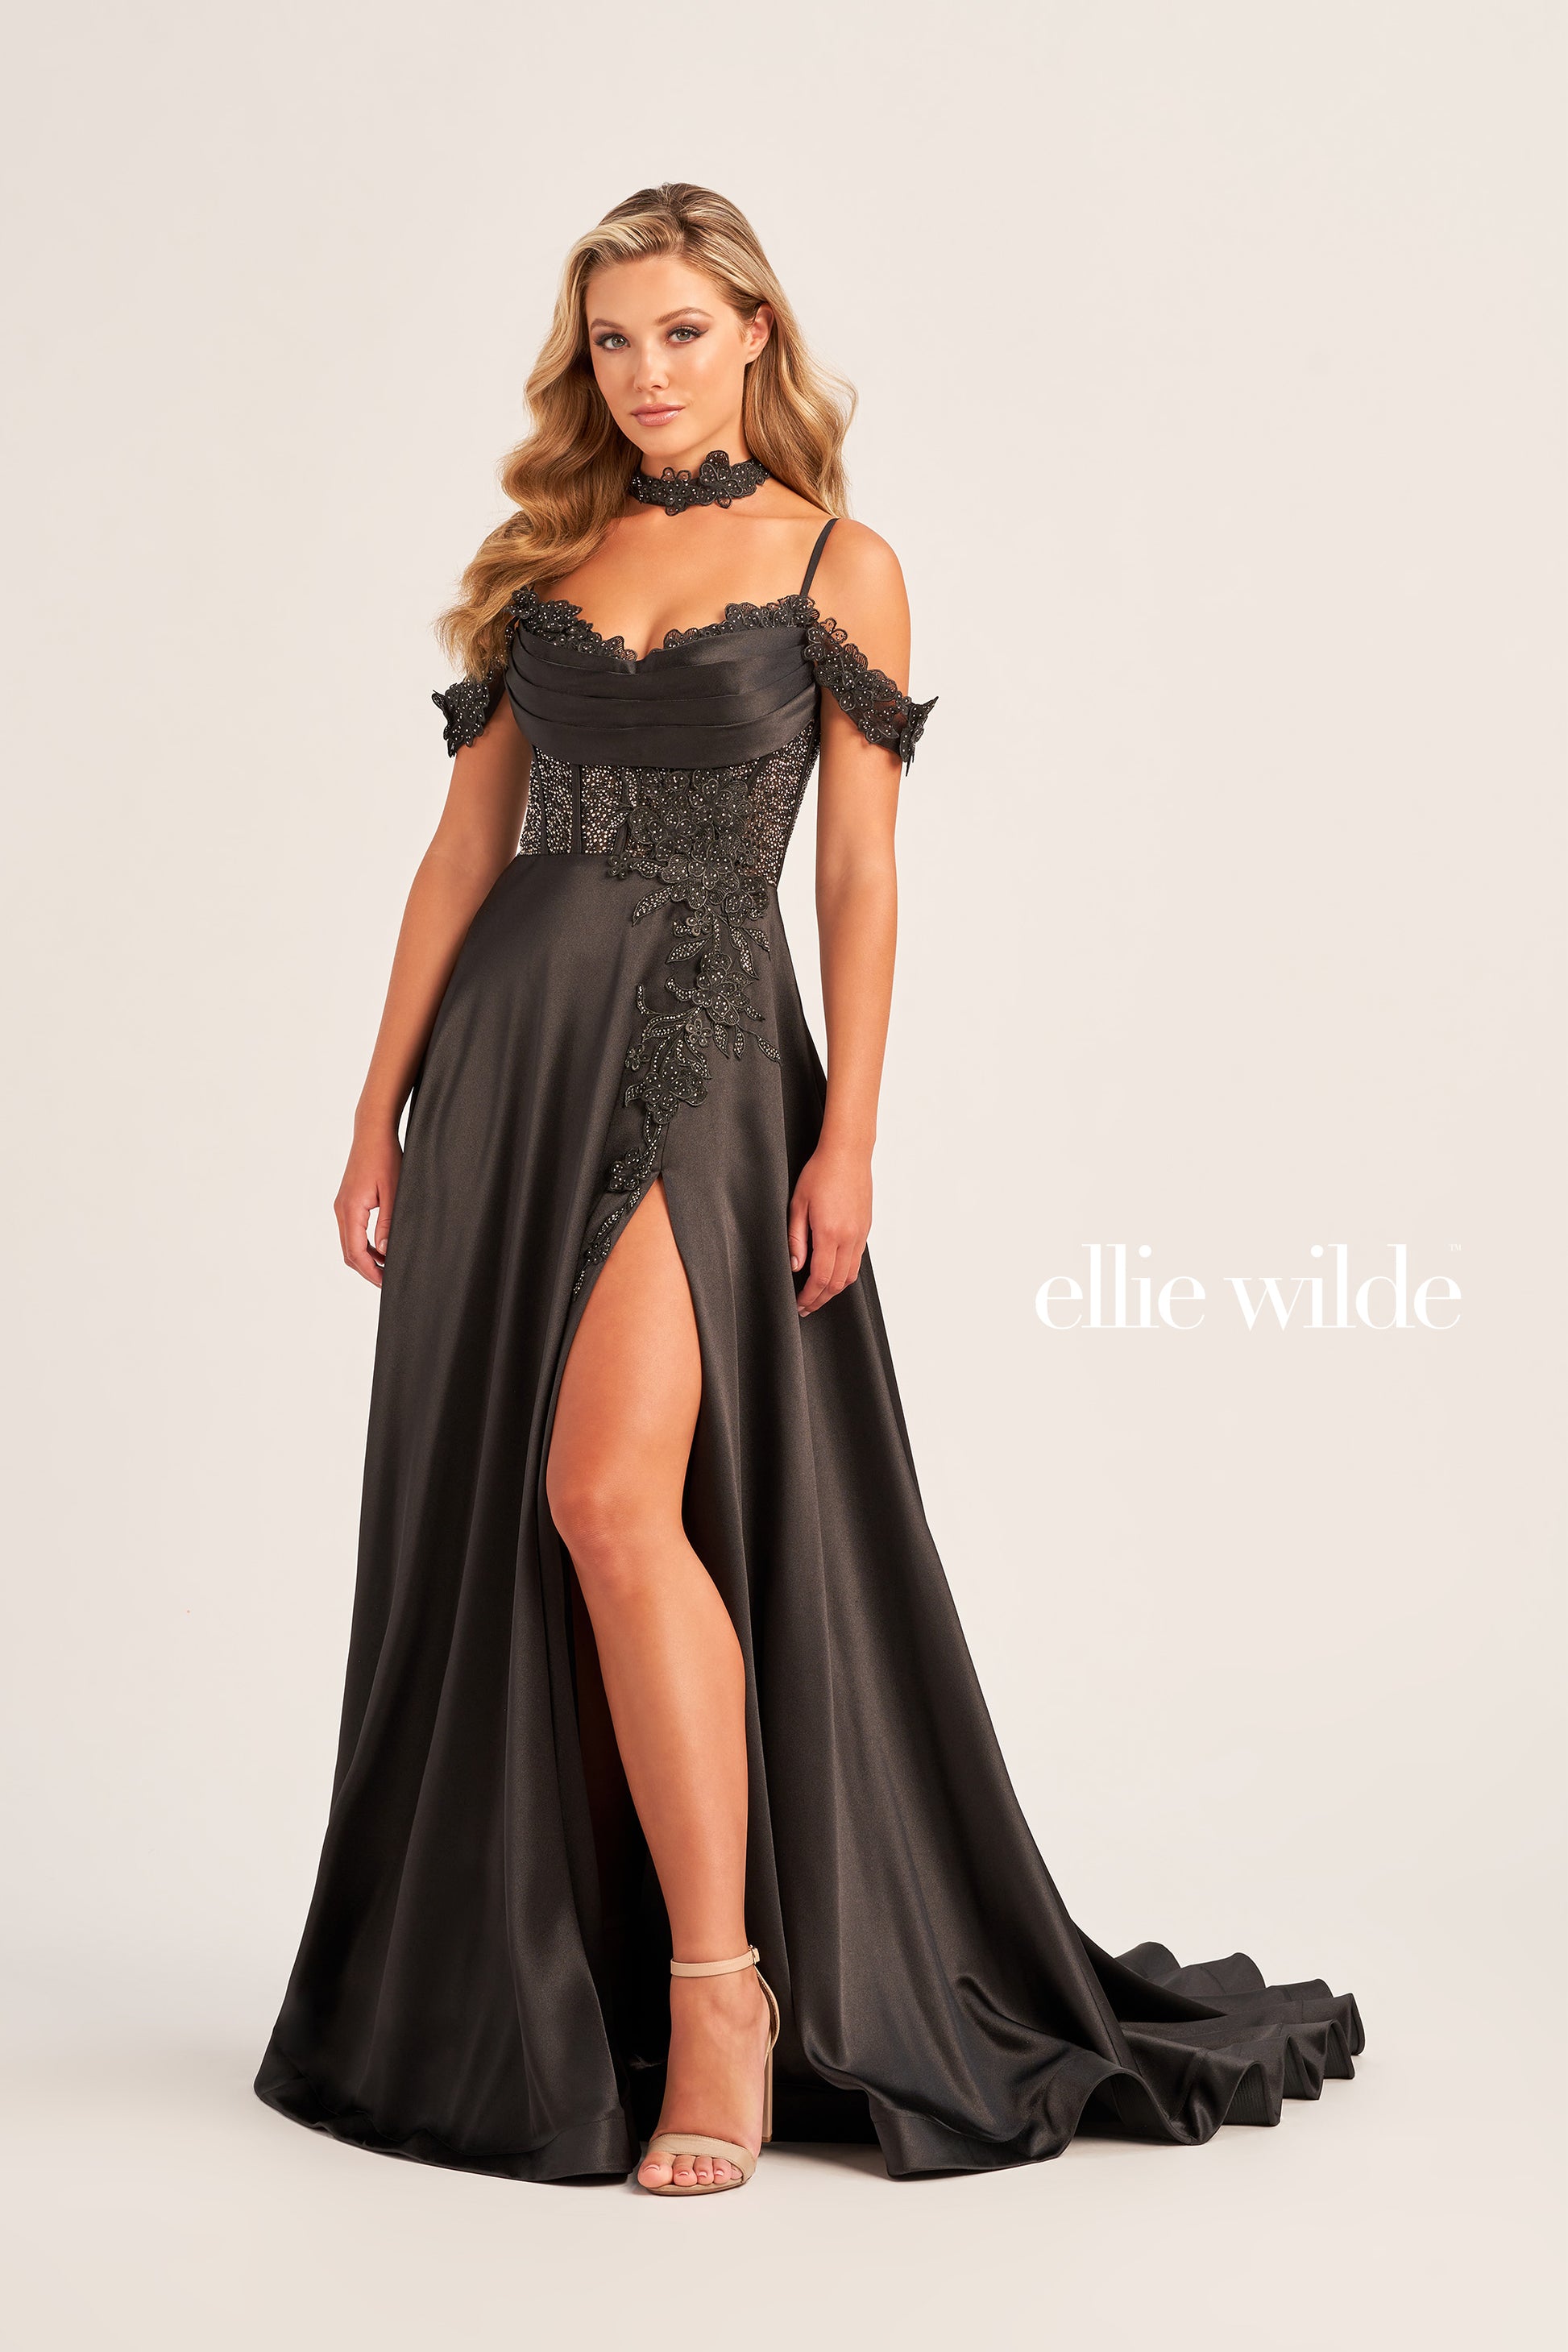 Look like a modern-day royalty in the Ellie Wilde EW35029 Long Satin A Line Maxi Slit Prom Dress Lace Crystal Corset off the shoulder gown featuring intricate Lace Appliques, Satin, and Stone Accents in a Sweetheart neckline and natural waistline silhouette. A must-have for your prom wardrobe, this modern design features an eye-catching Corset Bodice,